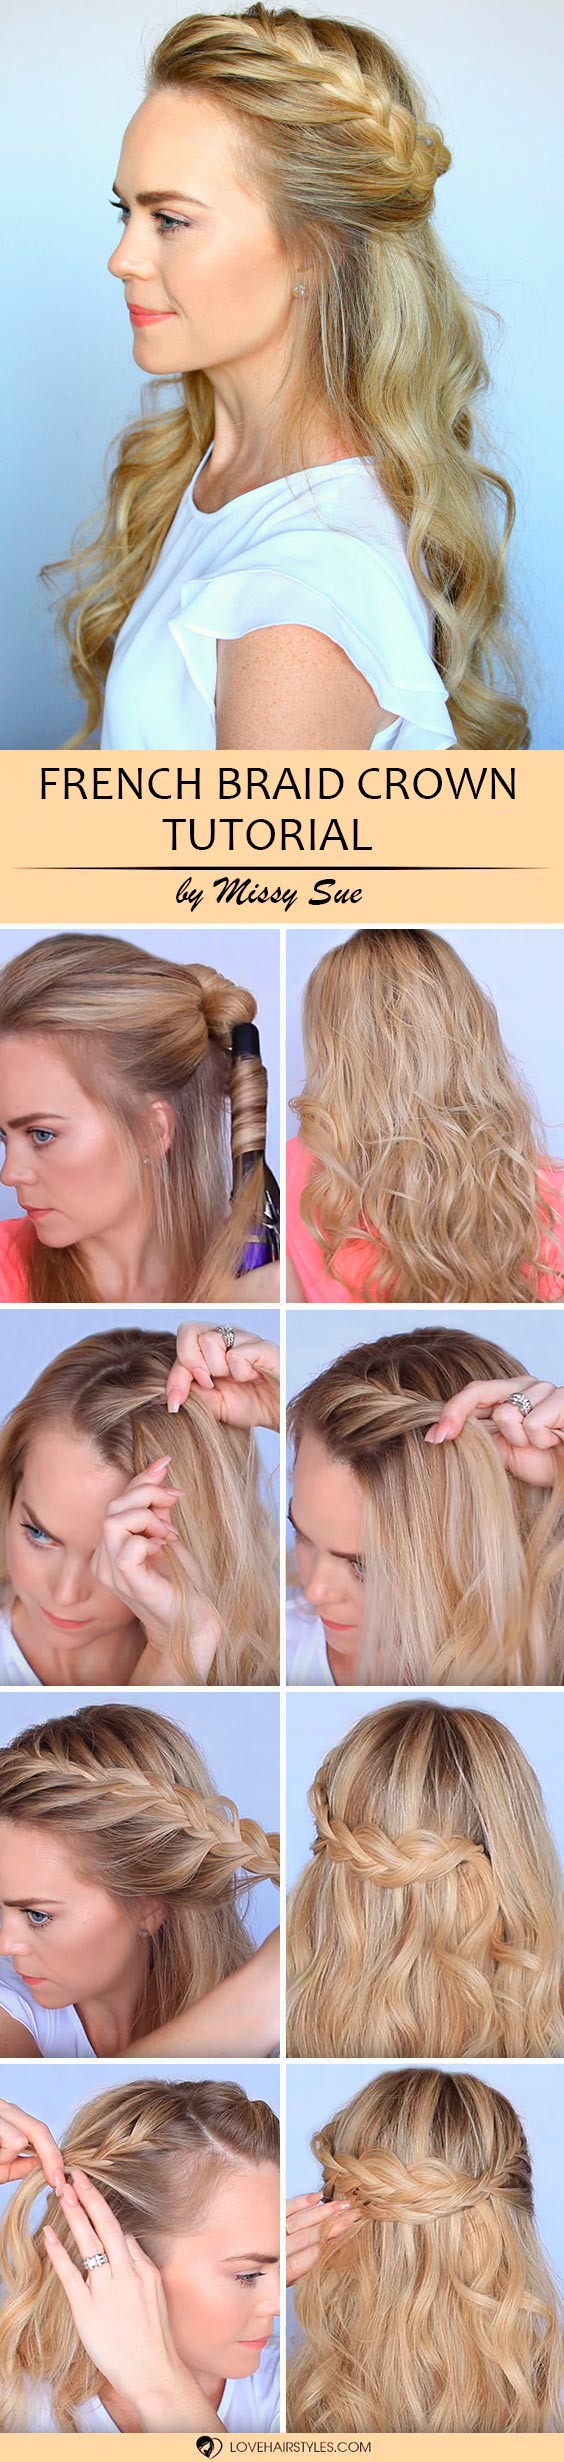 26 Simple Tutorials To Braid Your Own Hair Perfectly 